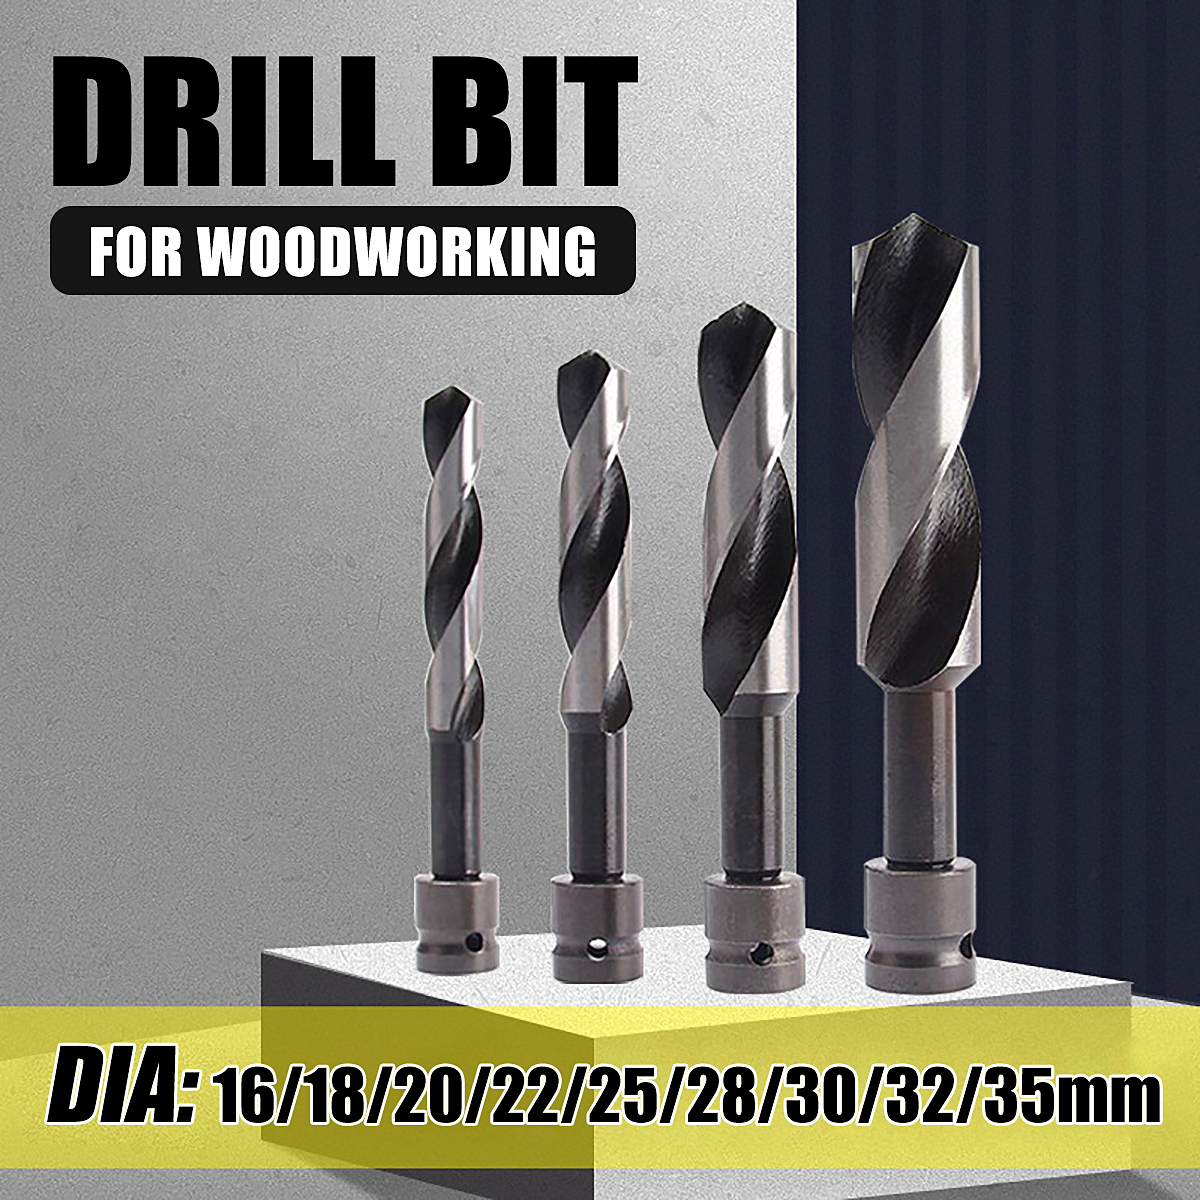 Woodworking-Drill-Bit-161820222528303235mm-Steel-for-Electric-Wrench-1766063-1